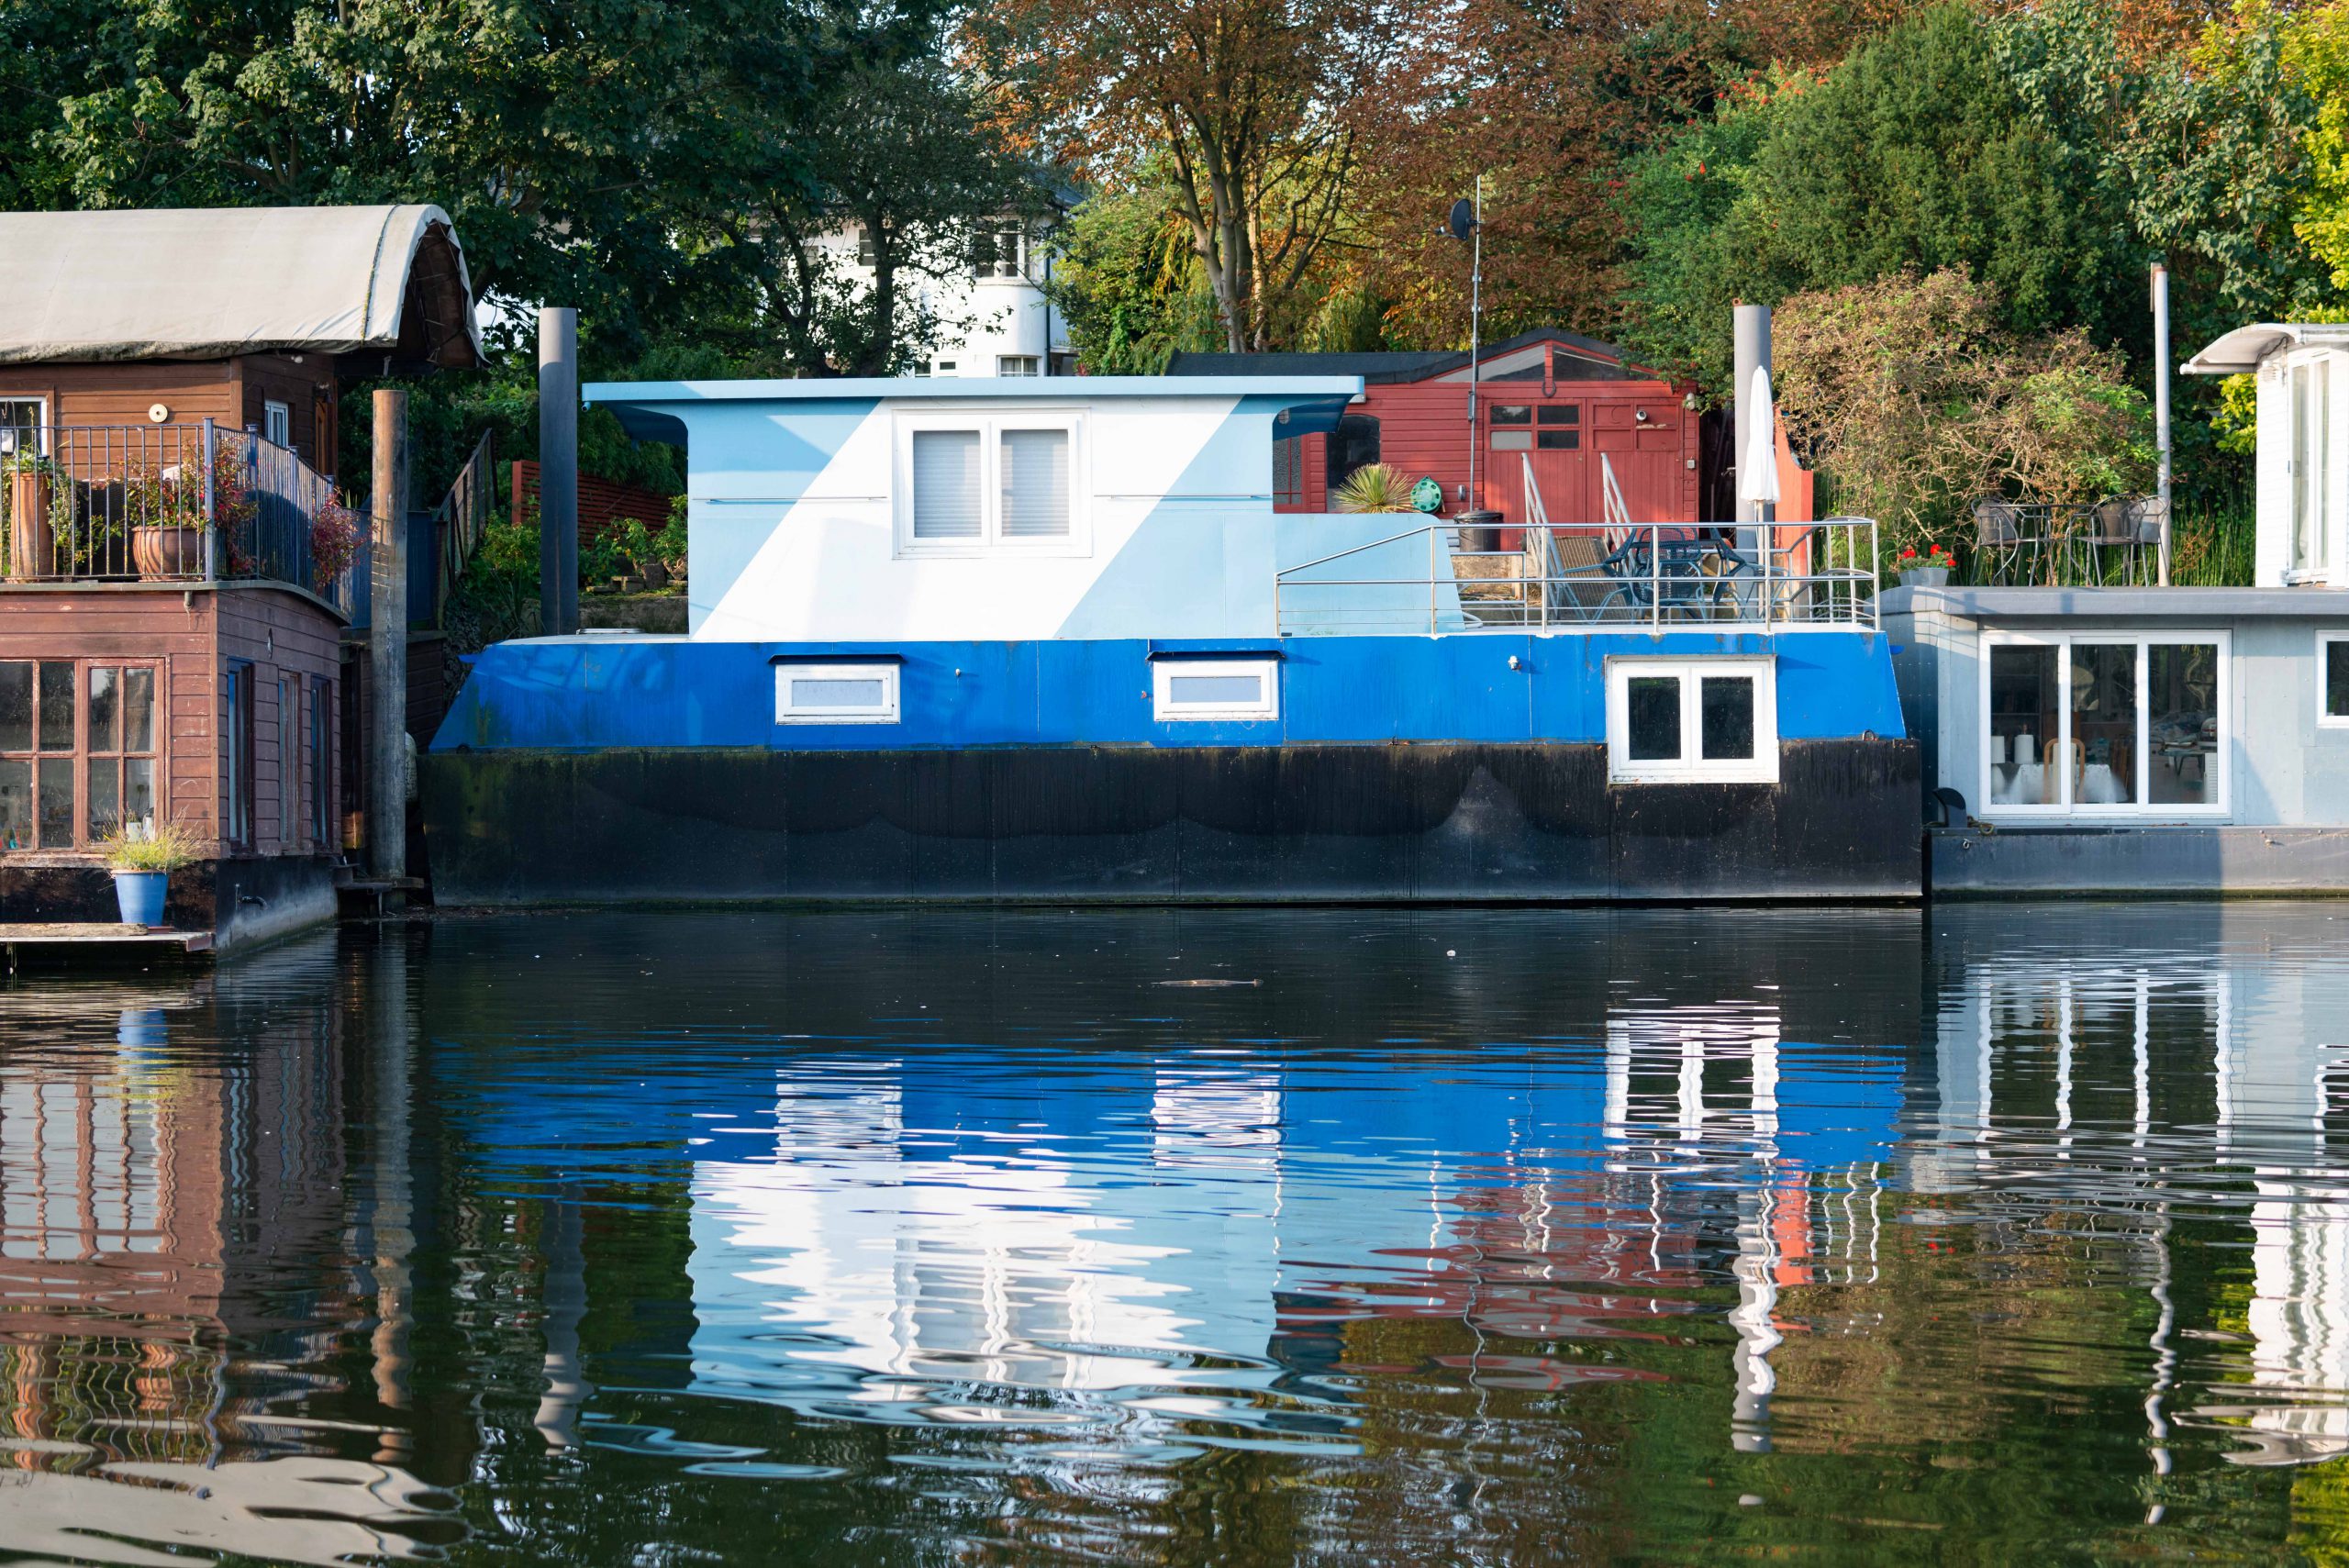 Houseboats: Living afloat on the tidal Thames - Boating on the Thames